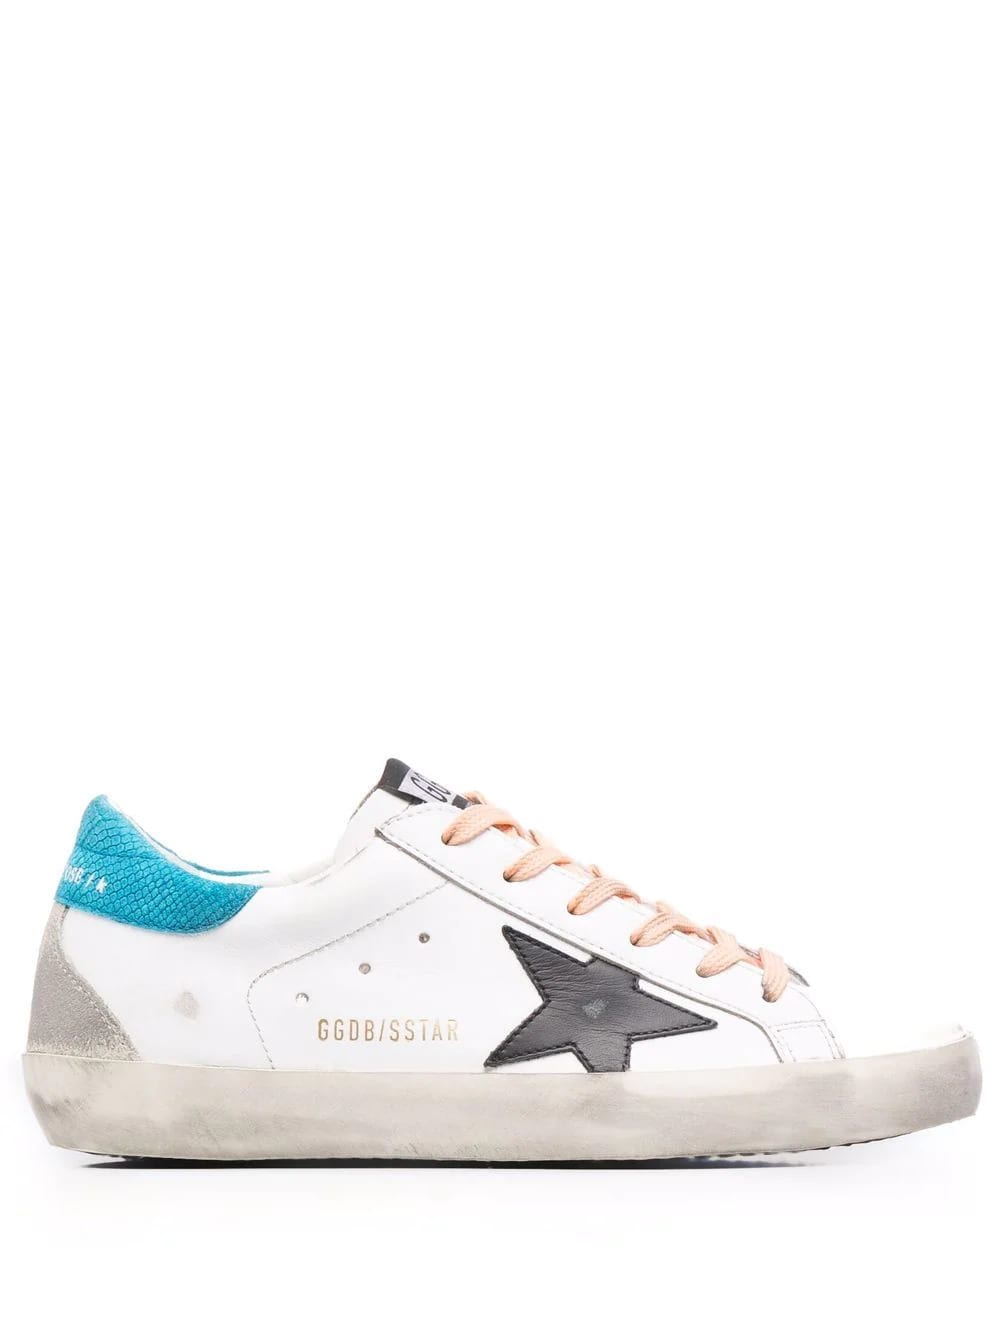 Golden Goose Woman White Super-star Sneakers With Peach Pink Laces, Black Star And Spoiler In Light Blue Fabric